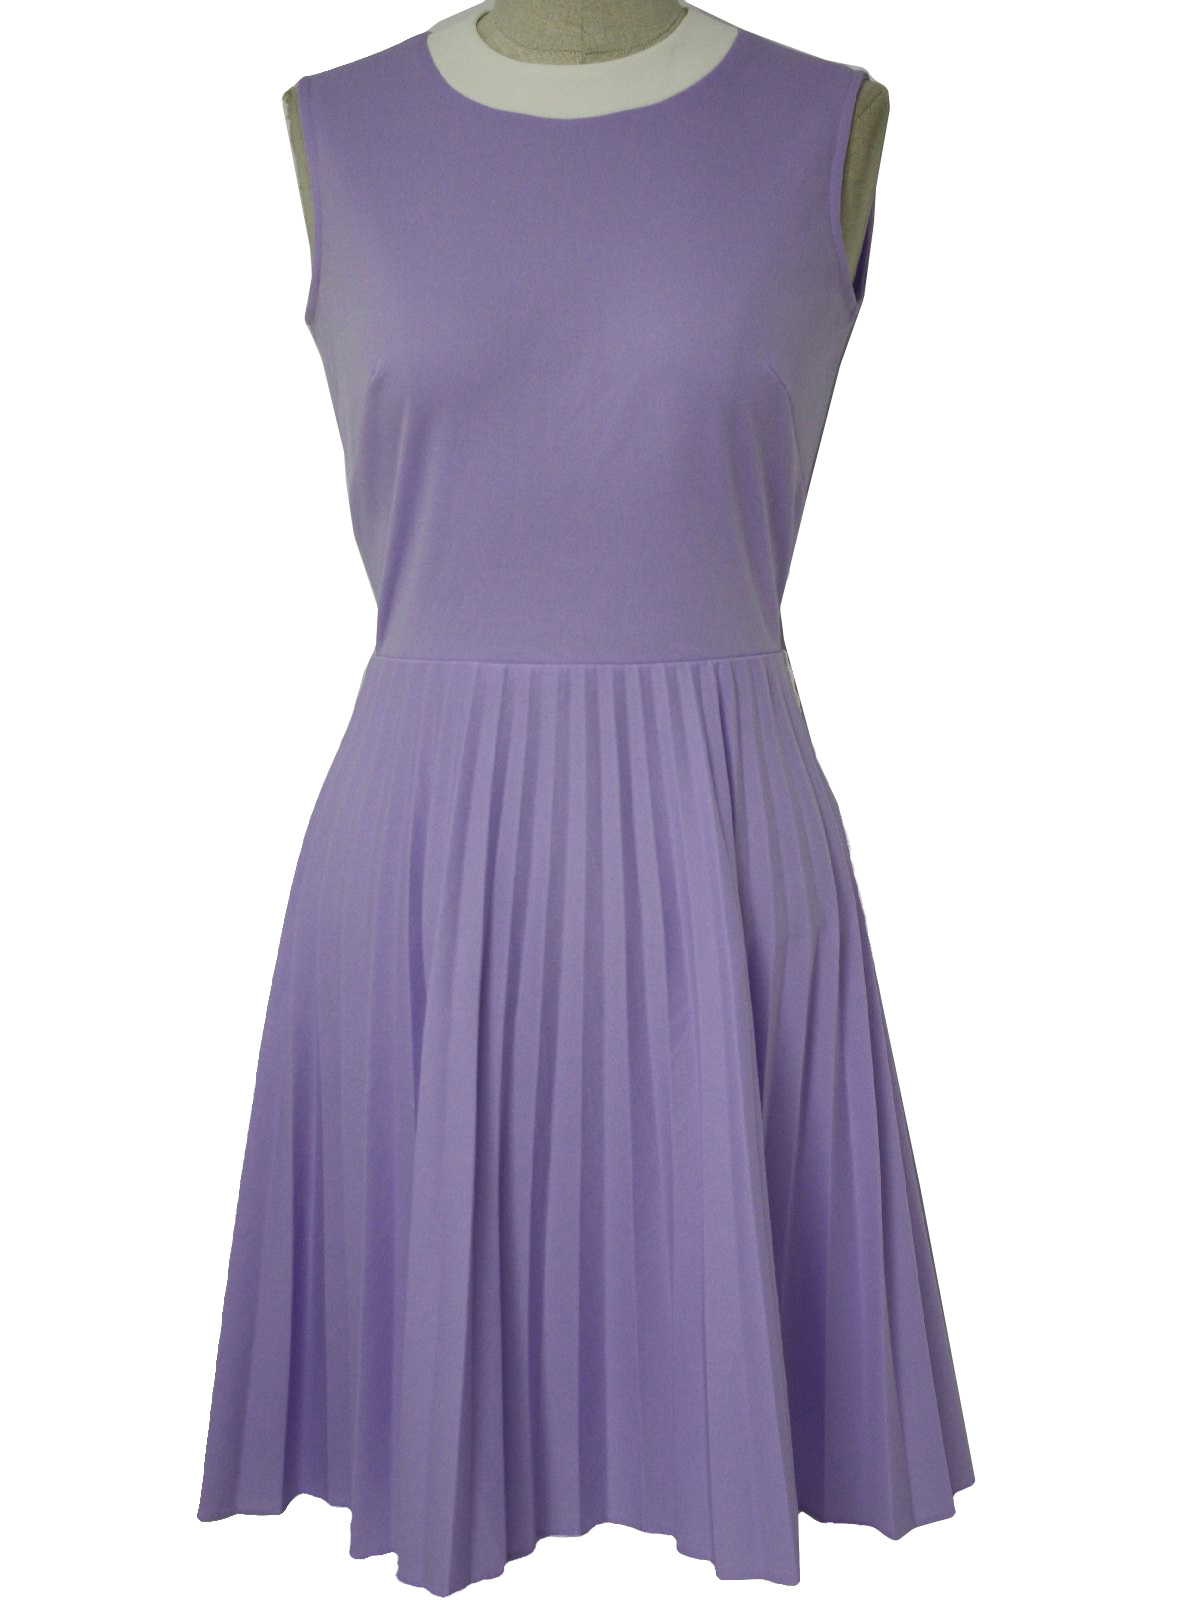 1970 s sears knit dress 70s sears womens lavender and white tank cut ...